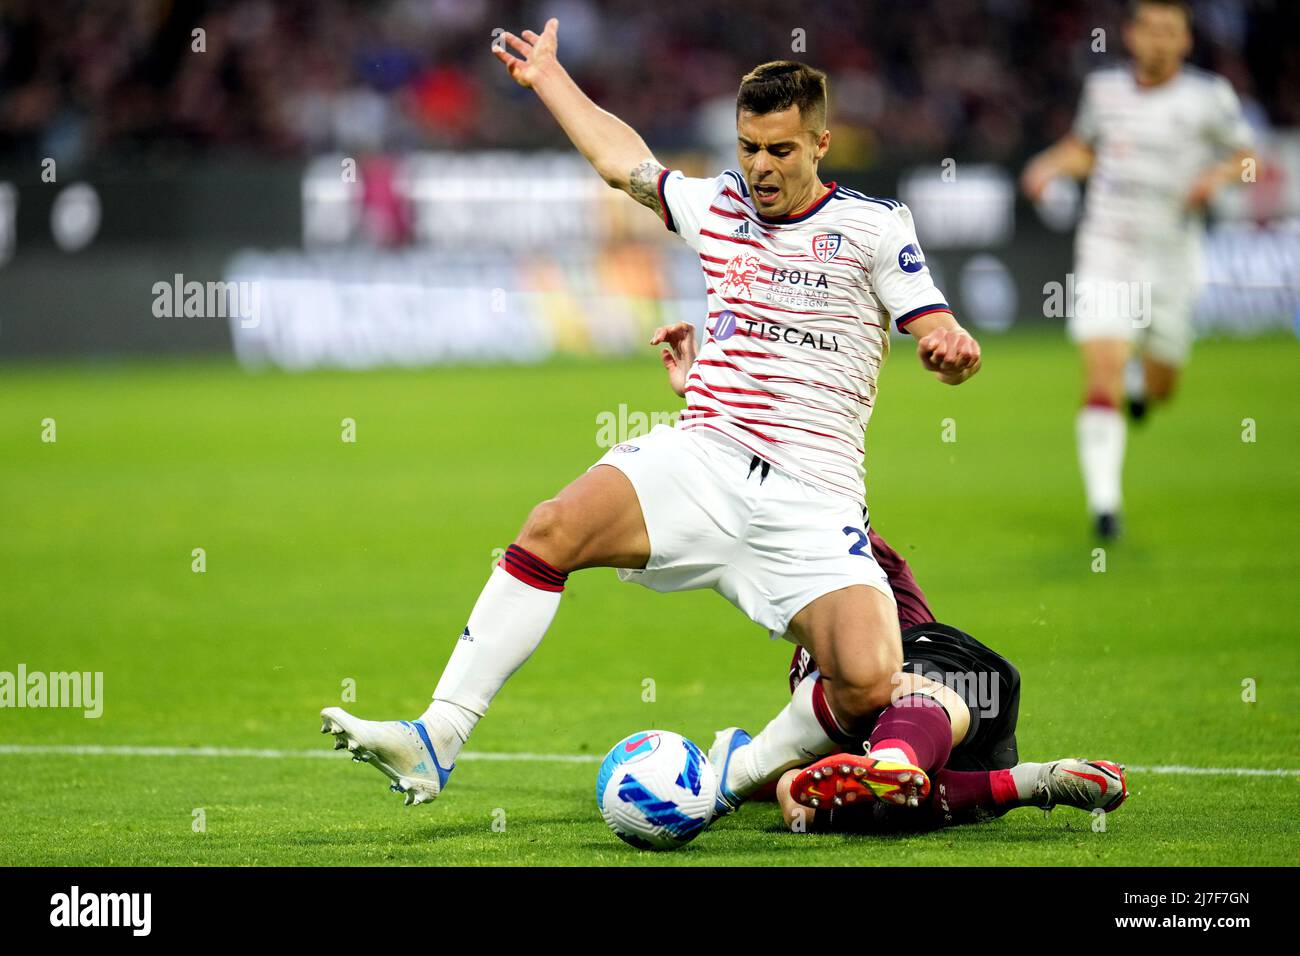 SALERNO, ITALY - MAY 08: Alberto Grassi of Cagliari Calcio competes for the ball with Federico Bonazzoli of US Salernitana ,during the Serie A match between US Salernitana and Cagliari Calcio at Stadio Arechi on May 8, 2022 in Salerno, Italy. (Photo by MB Media ) Stock Photo